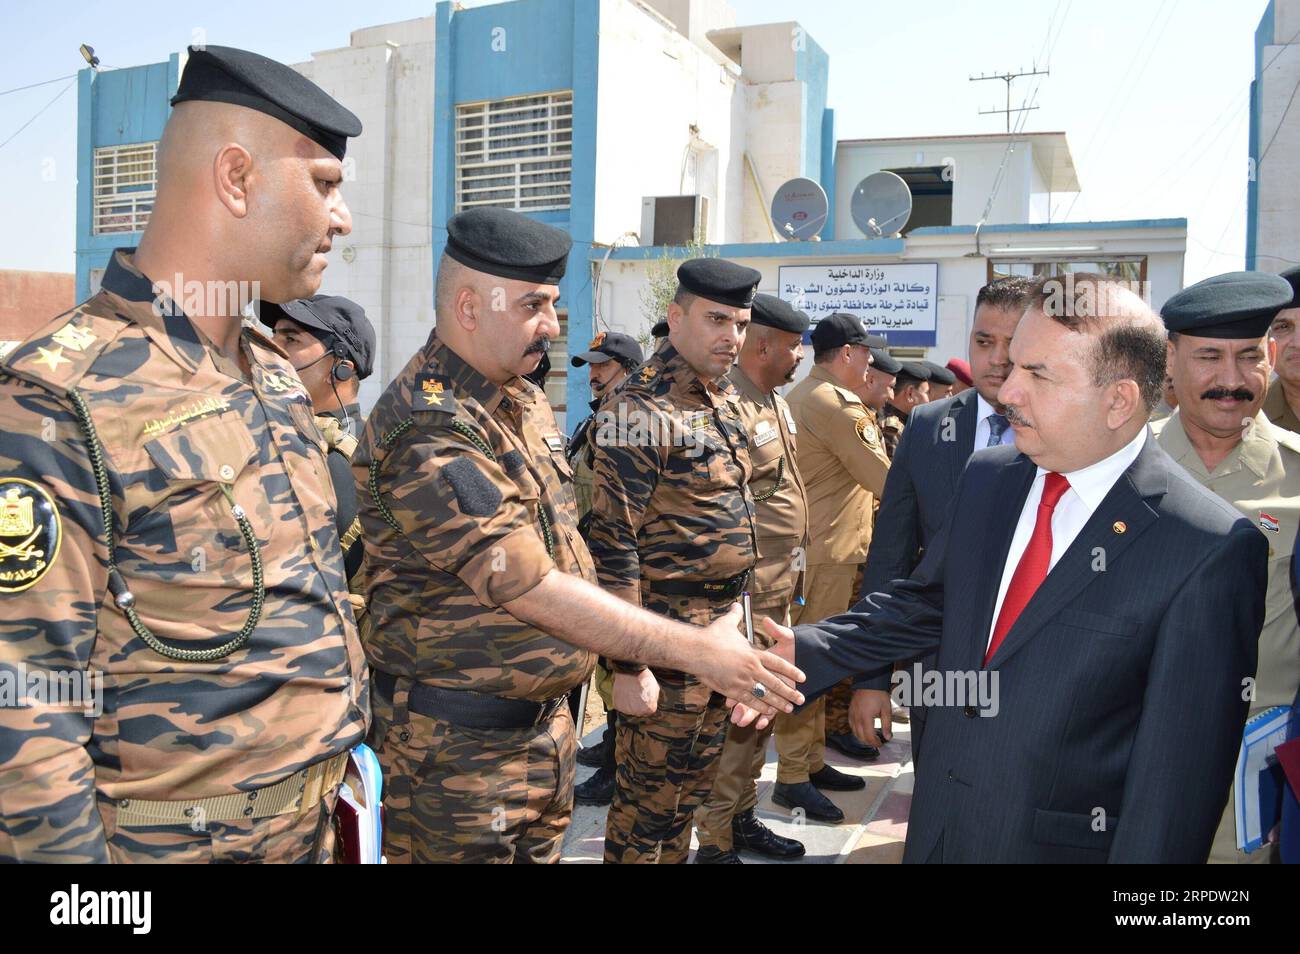 (190812) -- , Aug. 12, 2019 -- Iraqi Interior Minister Yassin al-Yasiri shakes hands with a police officers in Mosul, Iraq on Aug. 11, 2019. The Iraqi Interior Ministry reinstated more than 13,000 police personnel after being fired following the extremist Islamic State (IS) militants took control of Iraq s northern city of Mosul in 2014. IRAQ--POLICE PERSONNEL REINSTATING Baghdad PUBLICATIONxNOTxINxCHN Stock Photo